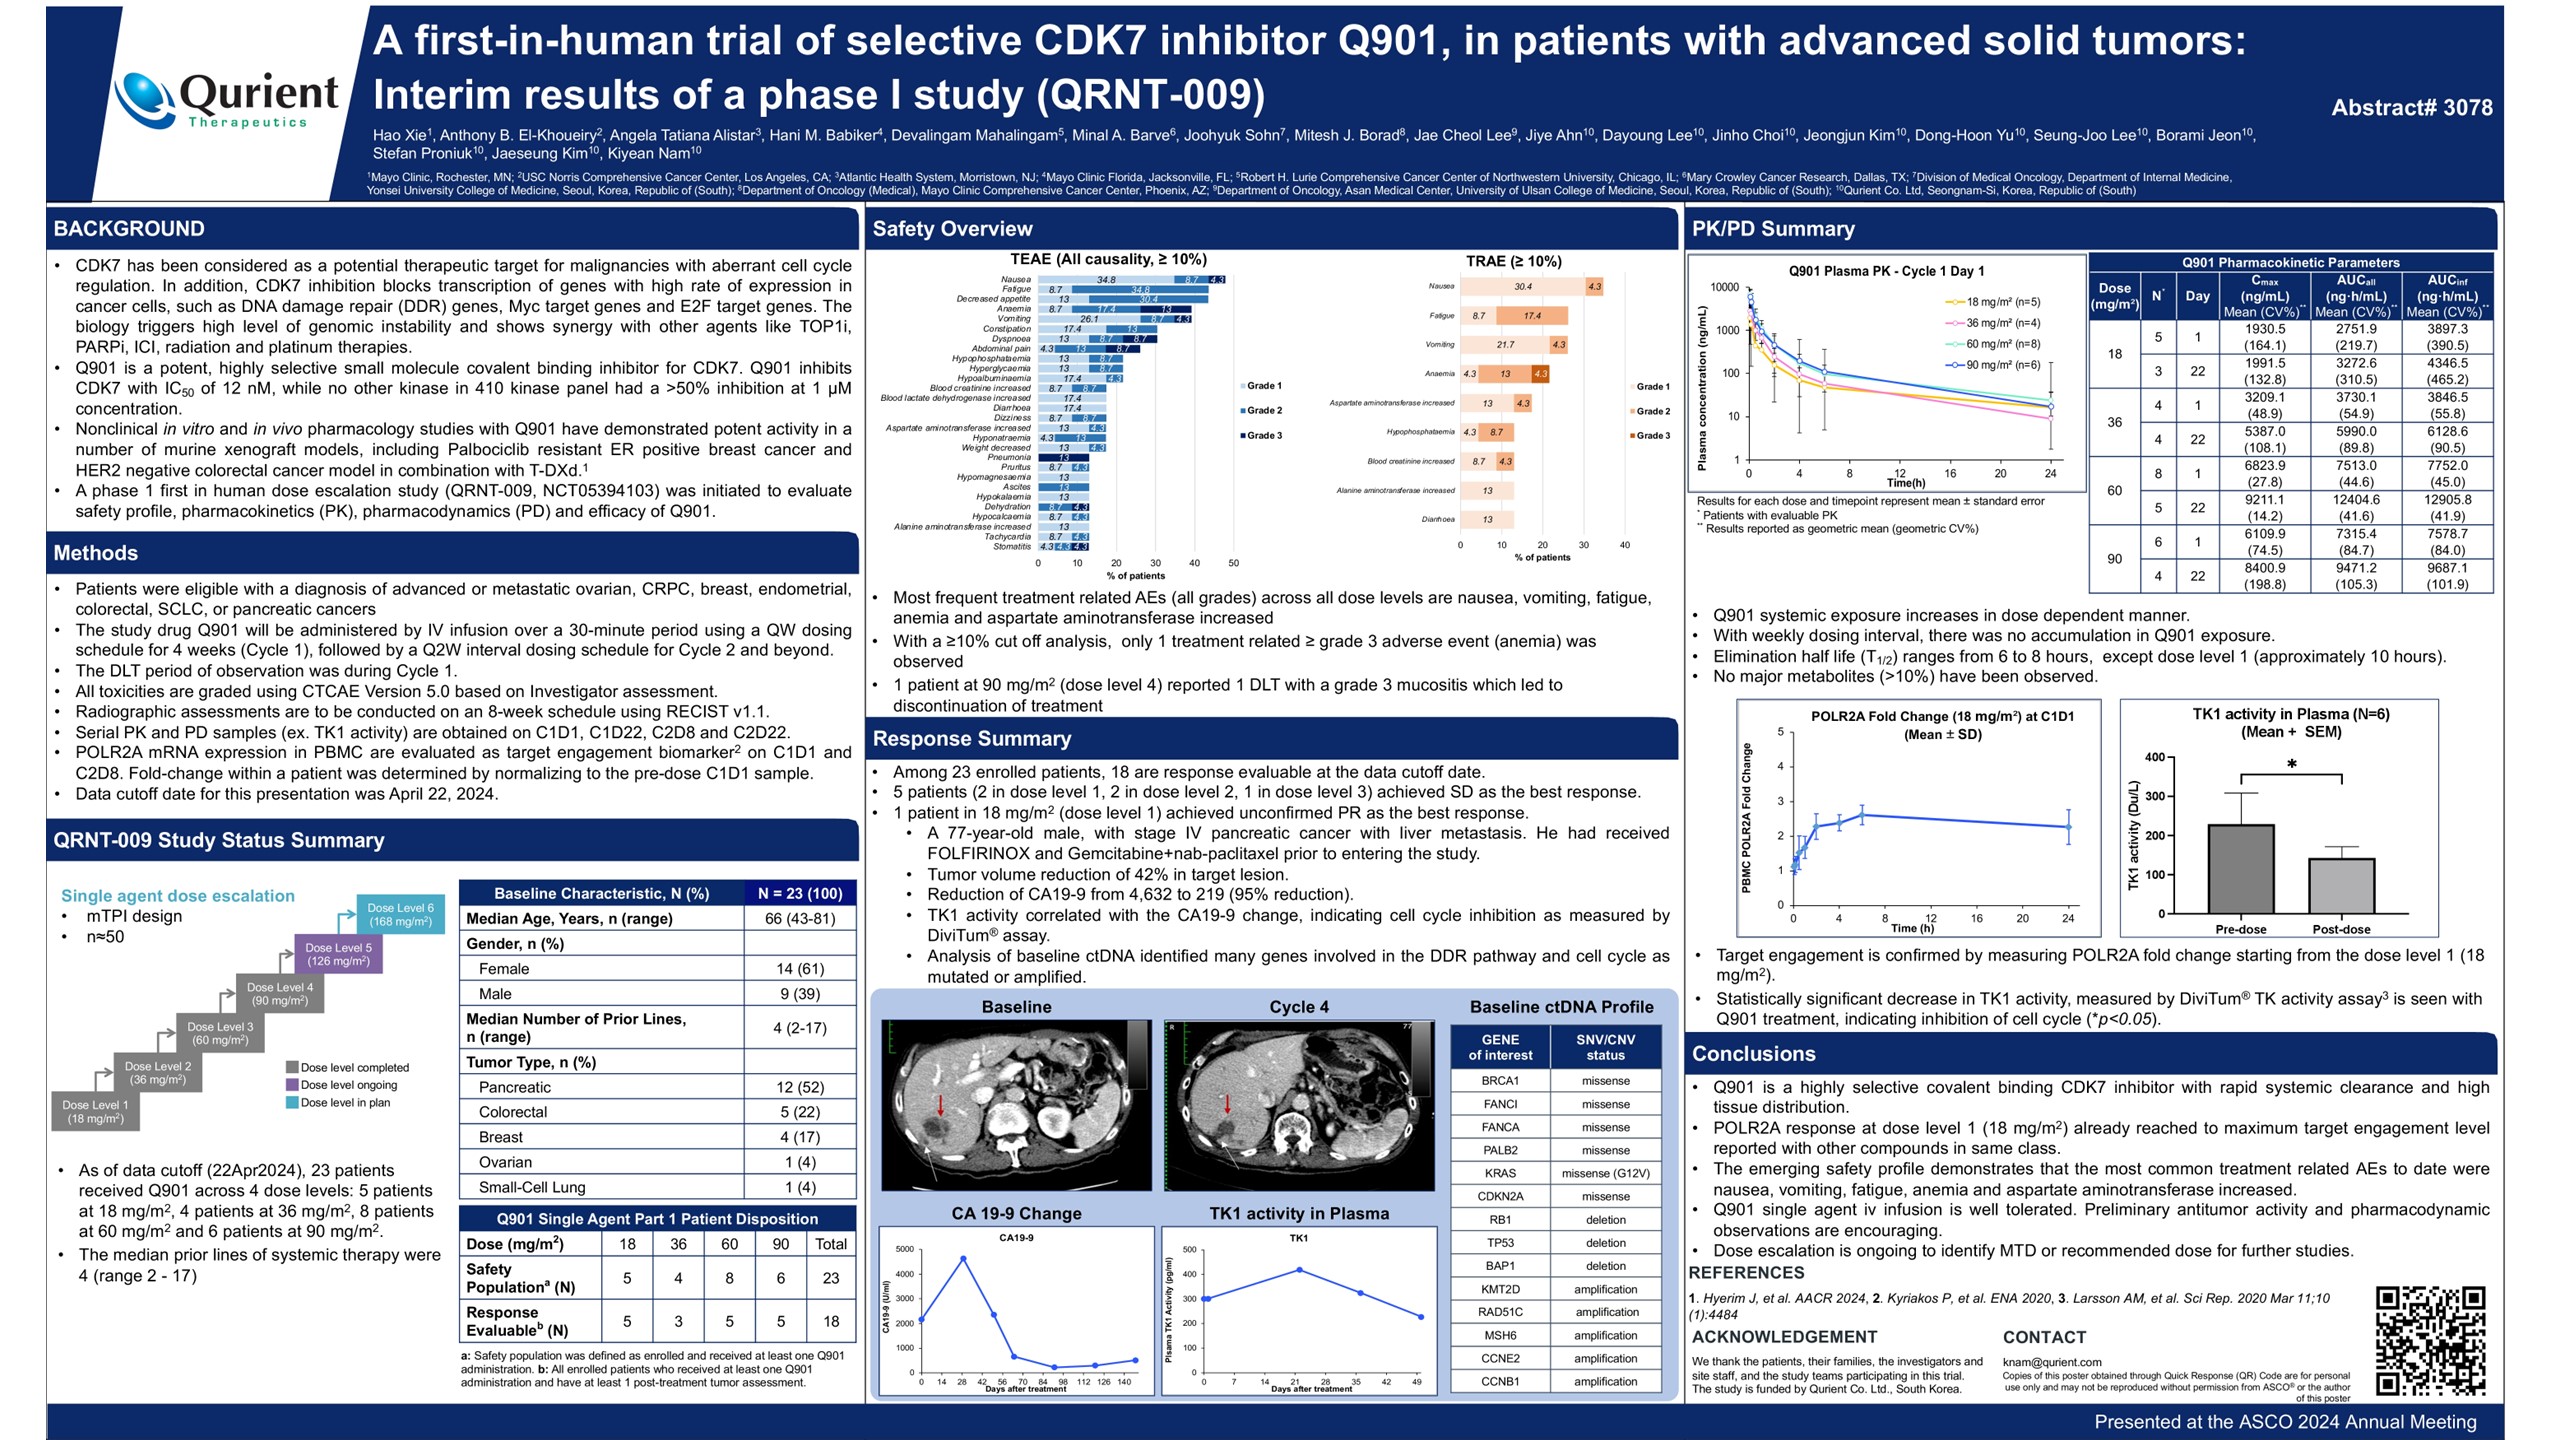 A first-in-human trial of selective CDK7 inhibitor Q901, in patients with advanced solid tumors: Interim results of a phase I study (QRNT-009).